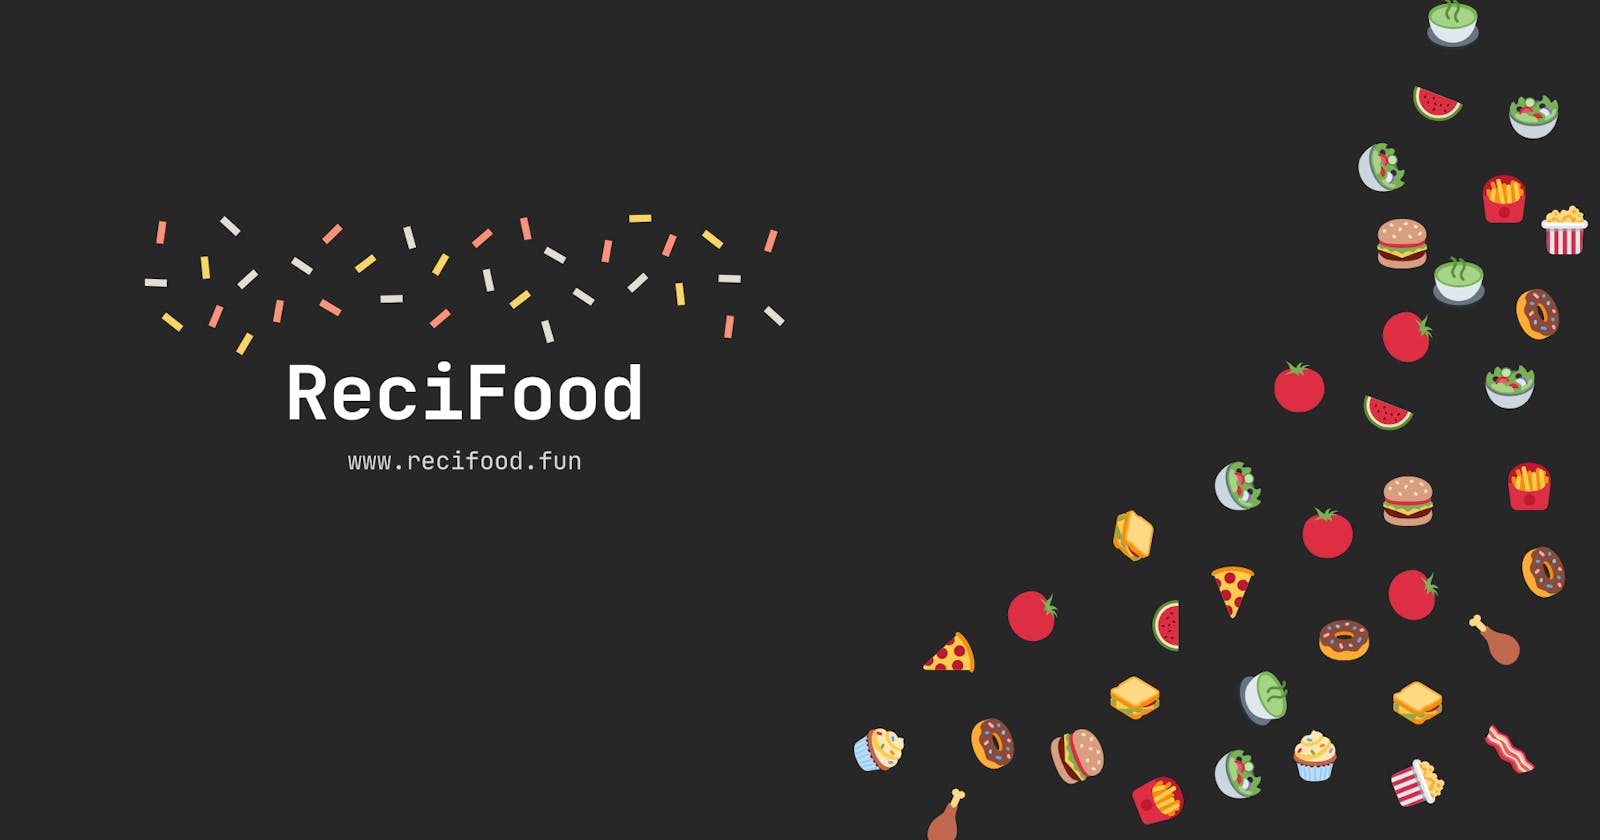 Recifood - Recipe Search App built with Next.js 🧁